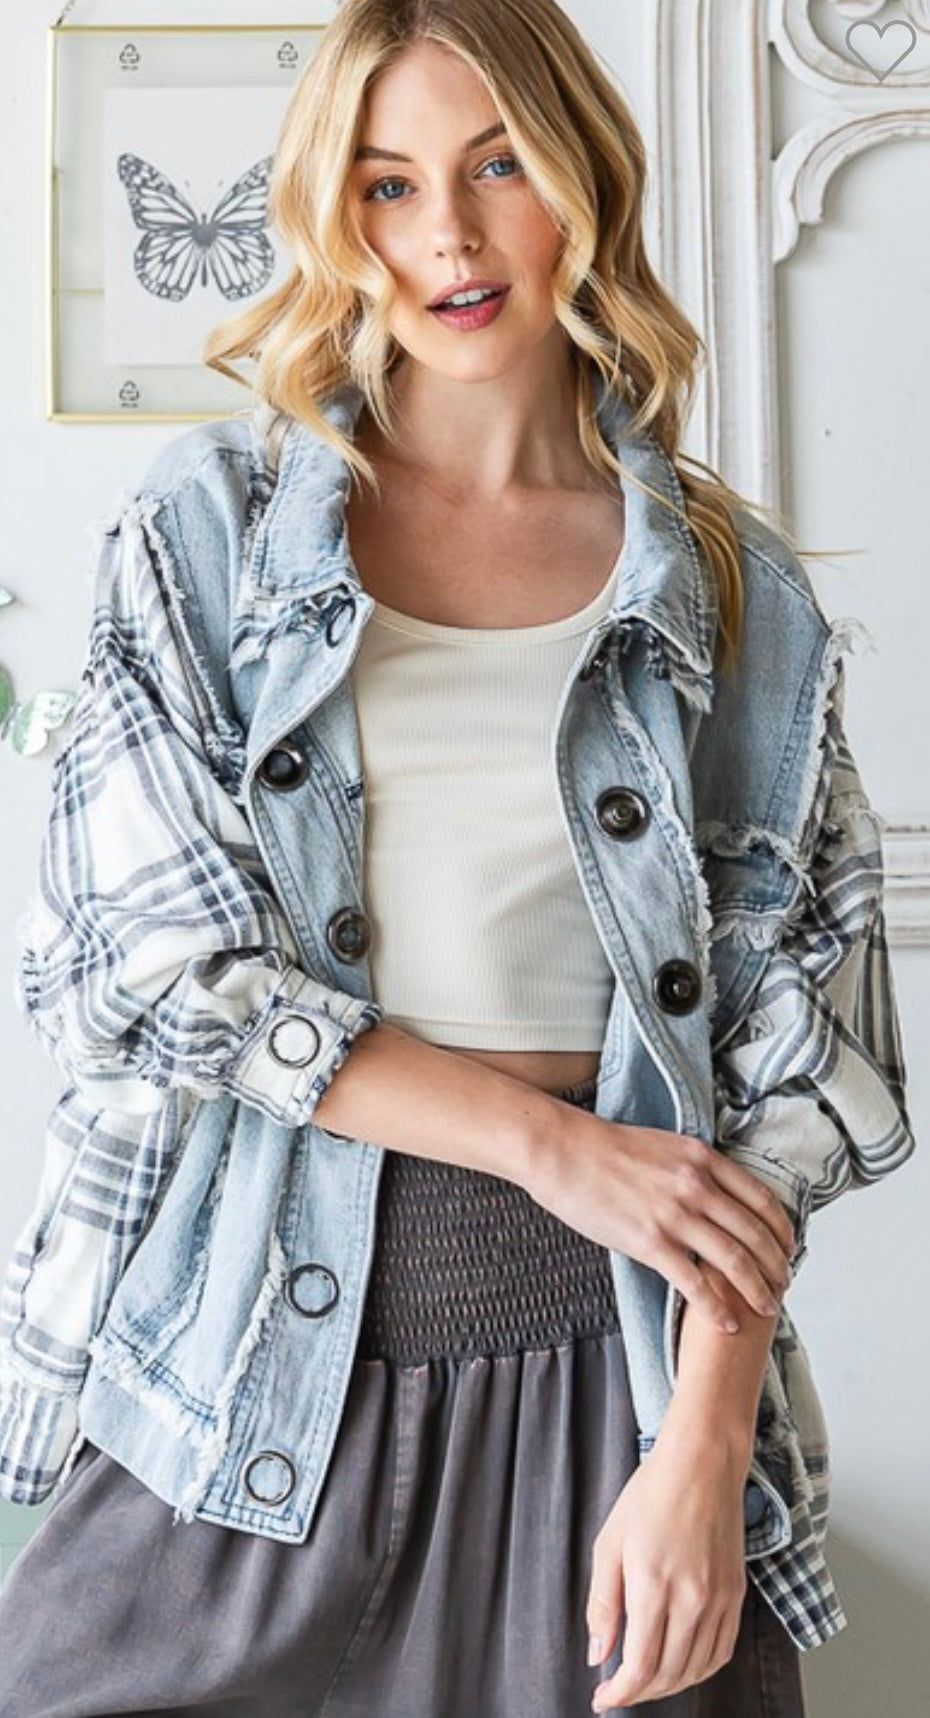 Loose fit snap front denim jacket with white and black plaid sleeves, up to 1X/2X